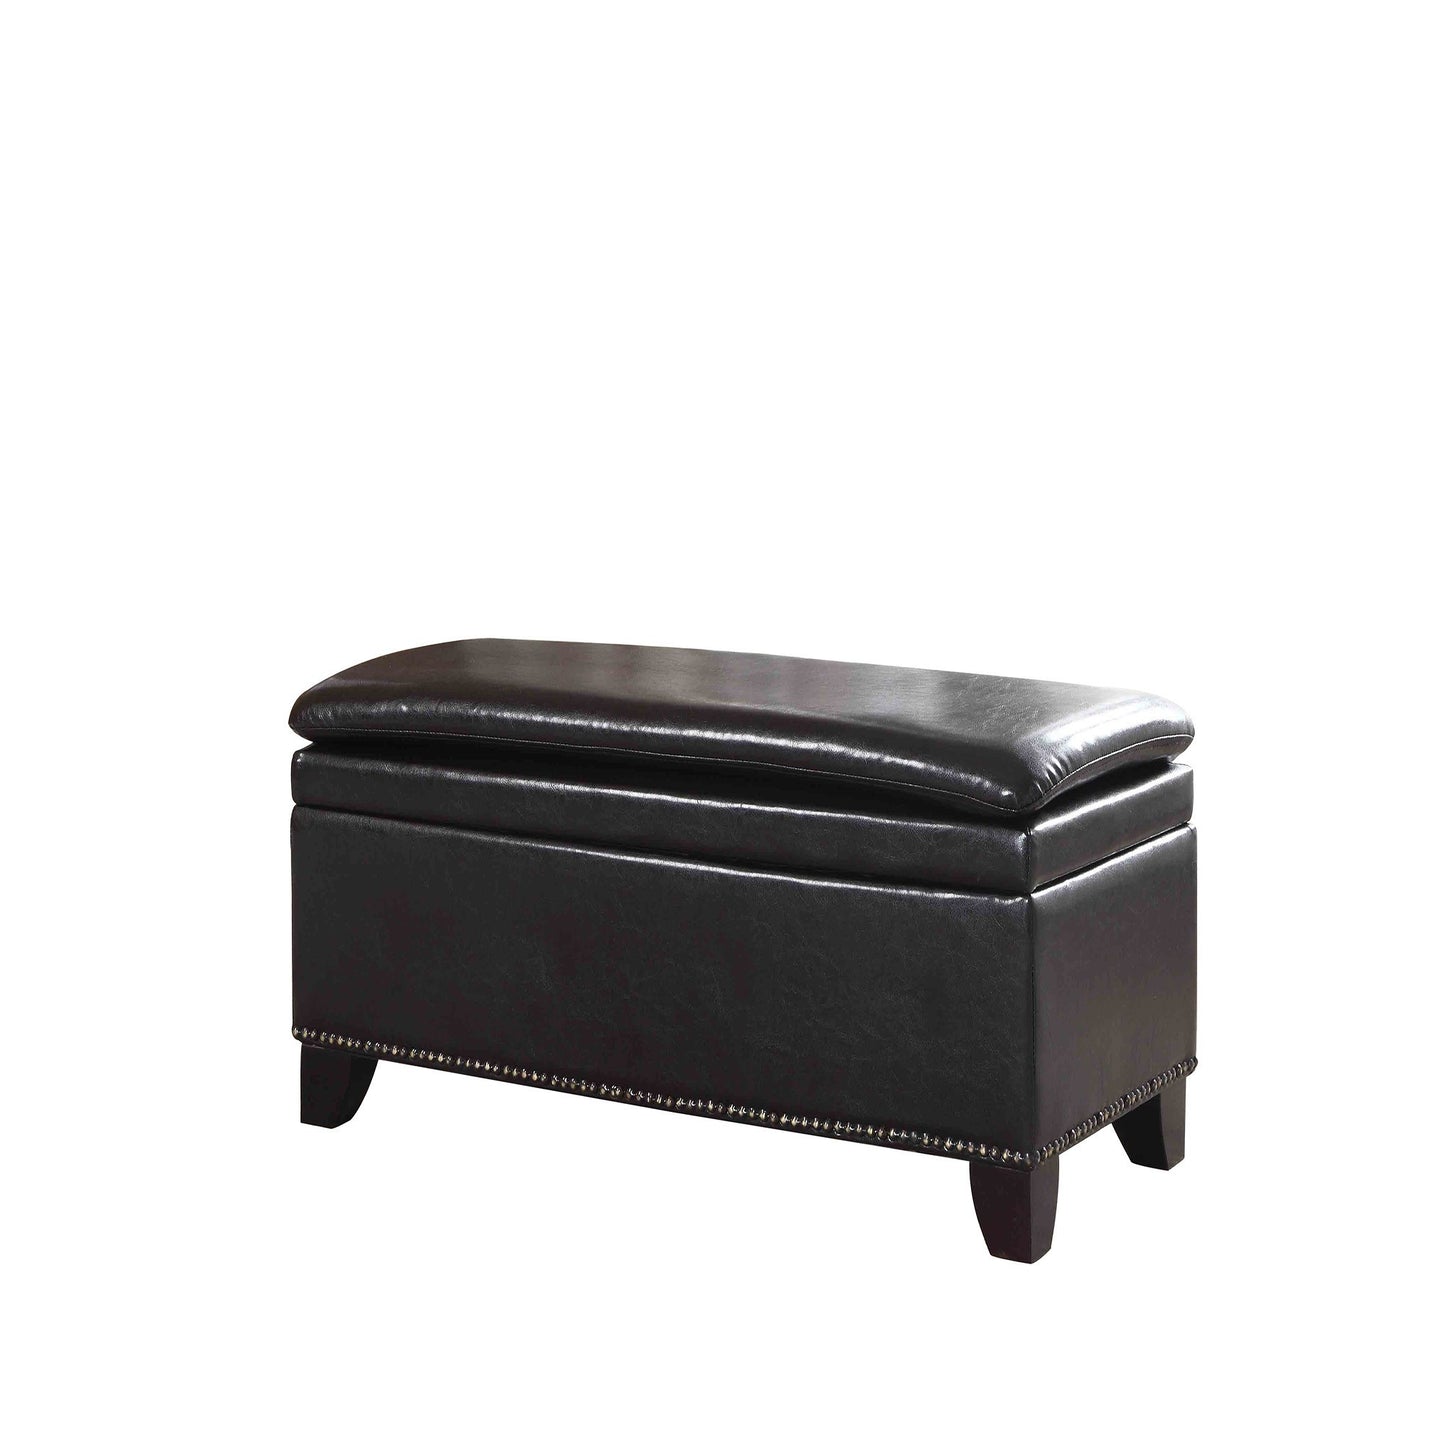 16" Dark Brown Upholstered Faux Leather Bench with Flip top